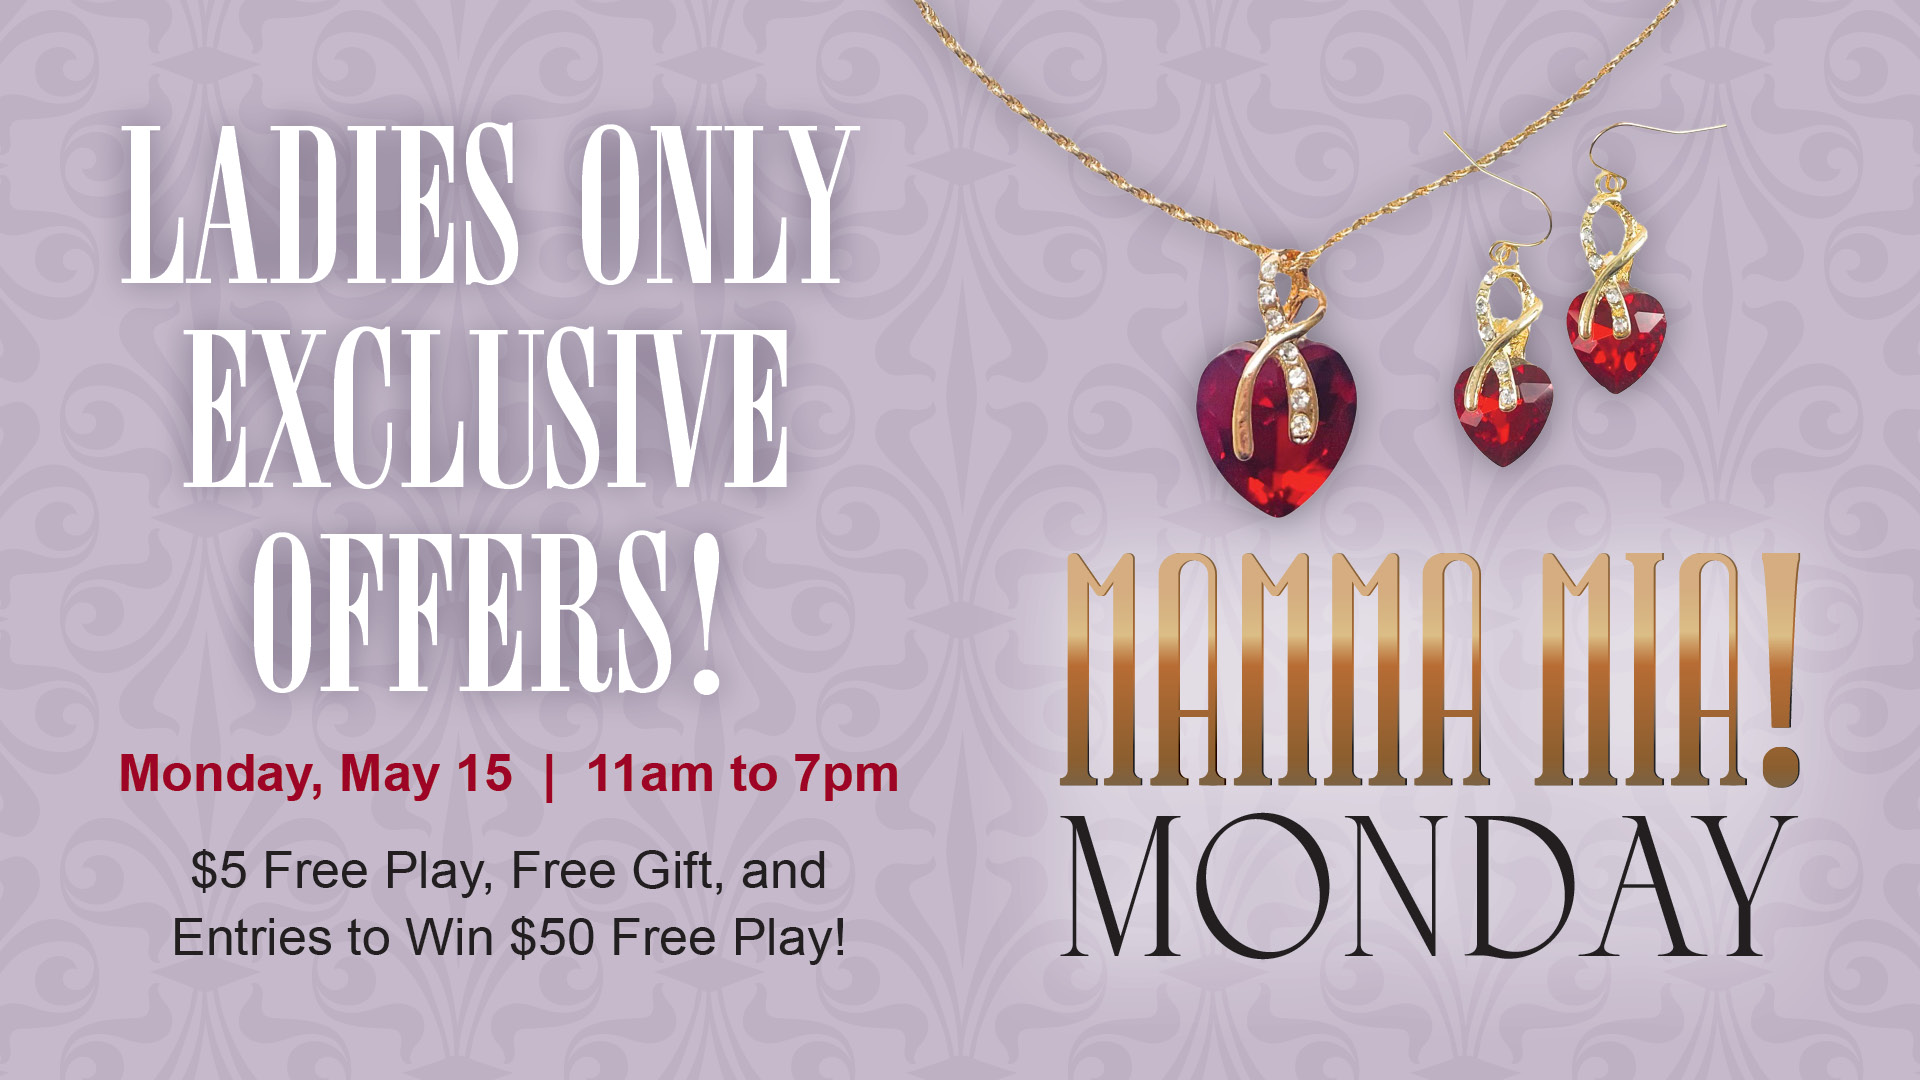 Mamma Mia! Monday. Ladies Only Exclusive Offers! Monday, May 15. 11am to 7pm. $5 free play, free gift, and entries to win $50 free play! See Winners Club for complete details.